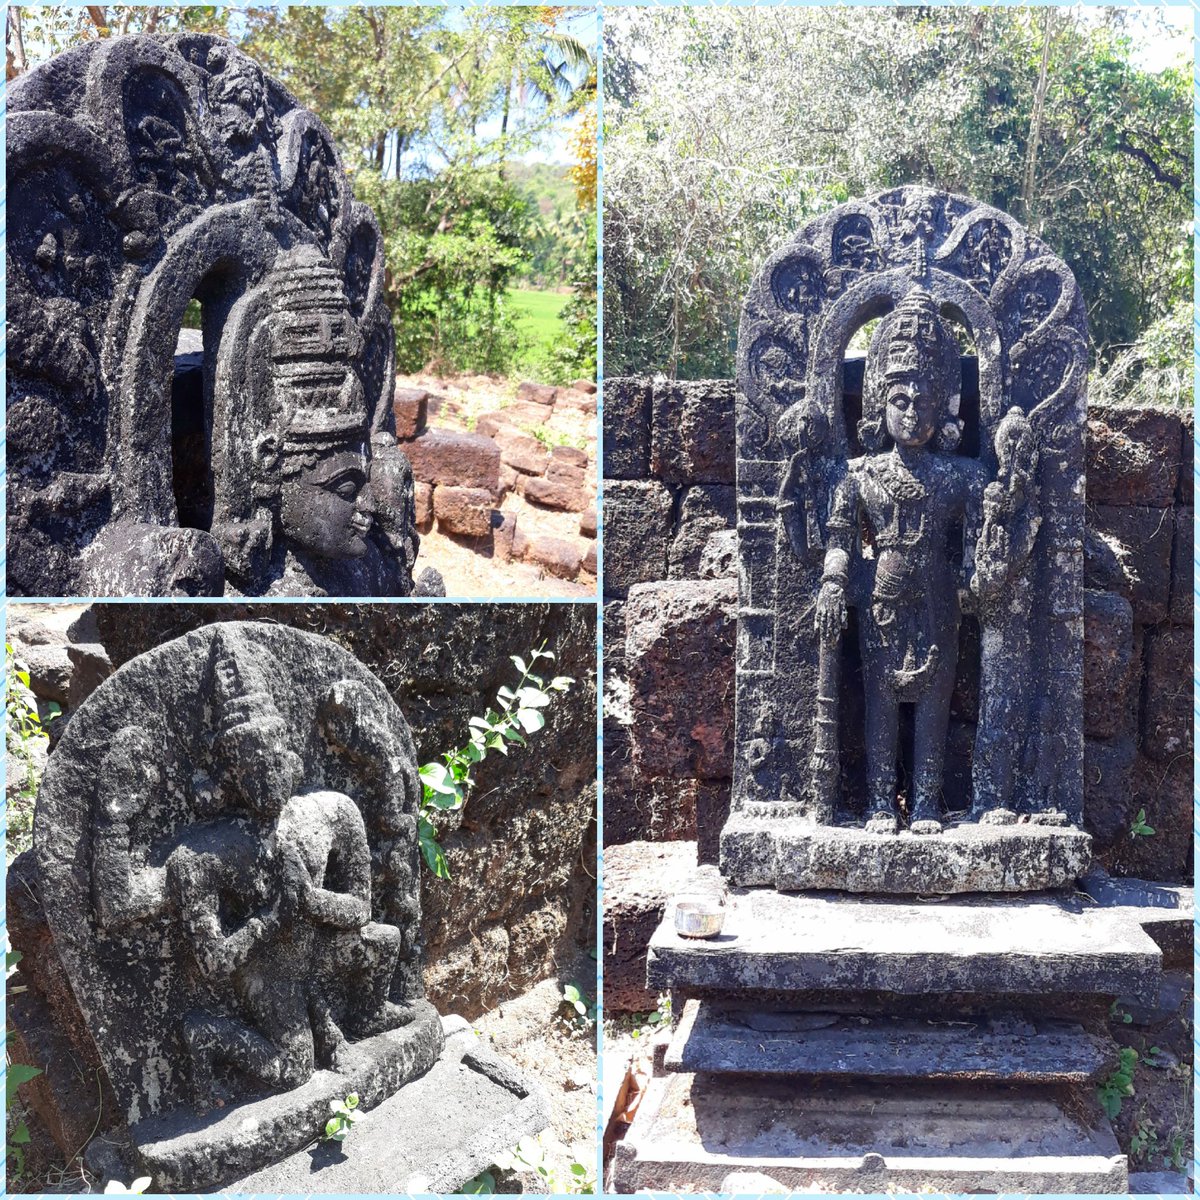 12th century idol of #Vishnu in the ruined Laxmi Narayana temple in Vichundre, Sanguem. A fine example of #Kadamba era art and architecture, it stands open to vagaries of nature but is enshrined in a grove and protected by the State department of archaeology.

#goabeyondbeaches